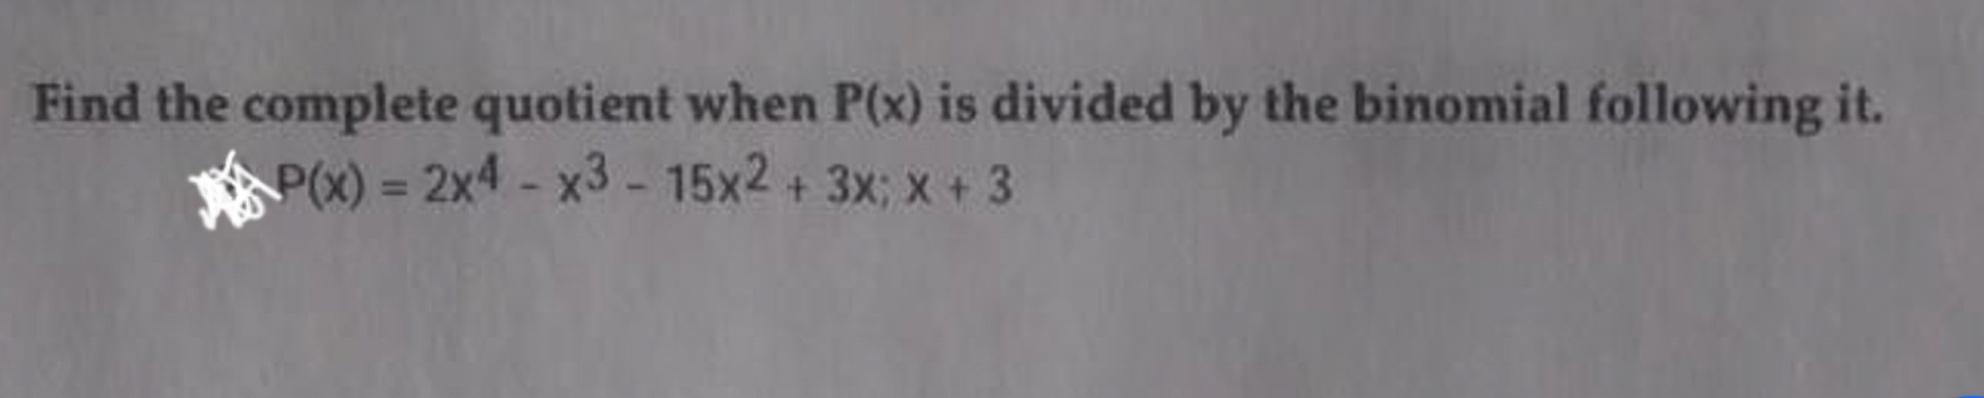 Find the complete quotient when P(x) is divided by the binomial following it.
P(x) = 2x4-x3-15x2 + 3x; x +3
%3D
